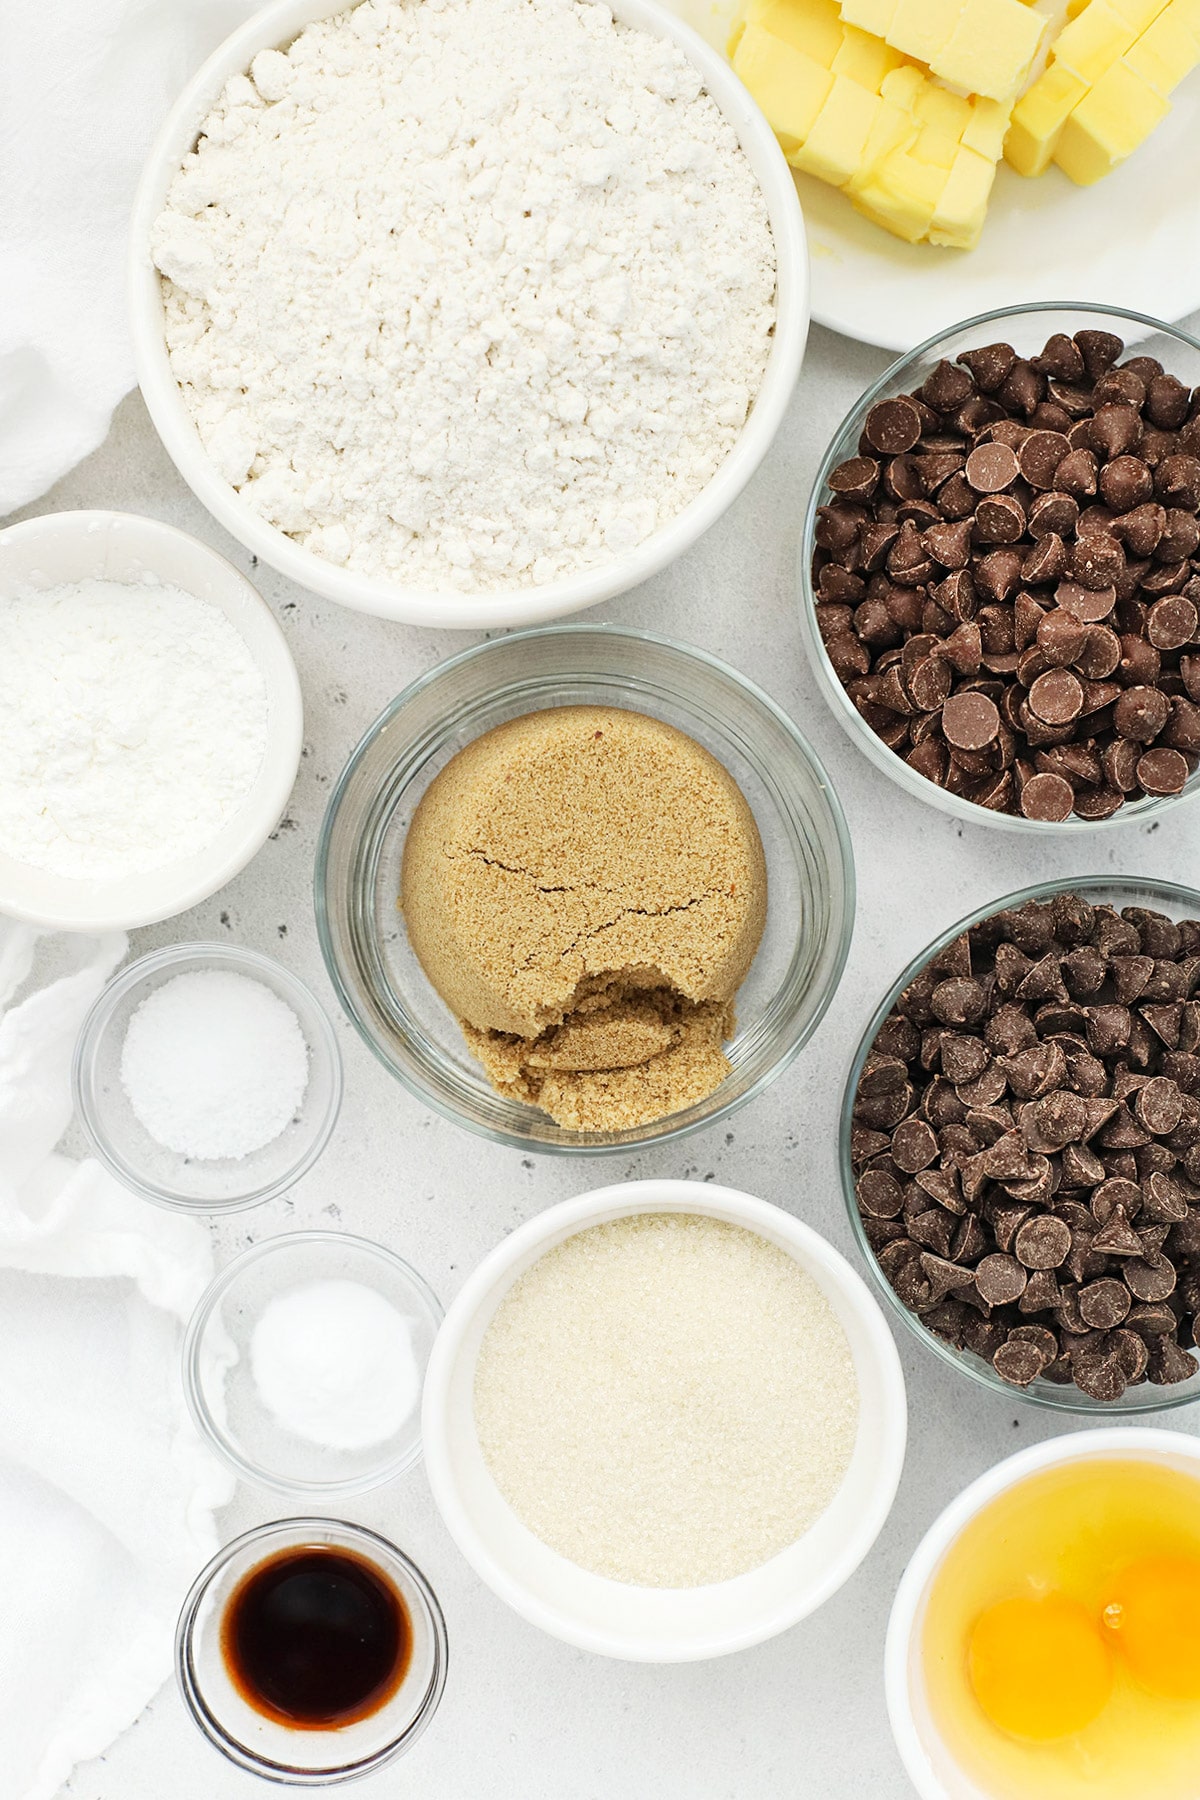 Overhead view of ingredients for thick gluten-free chocolate chip cookies